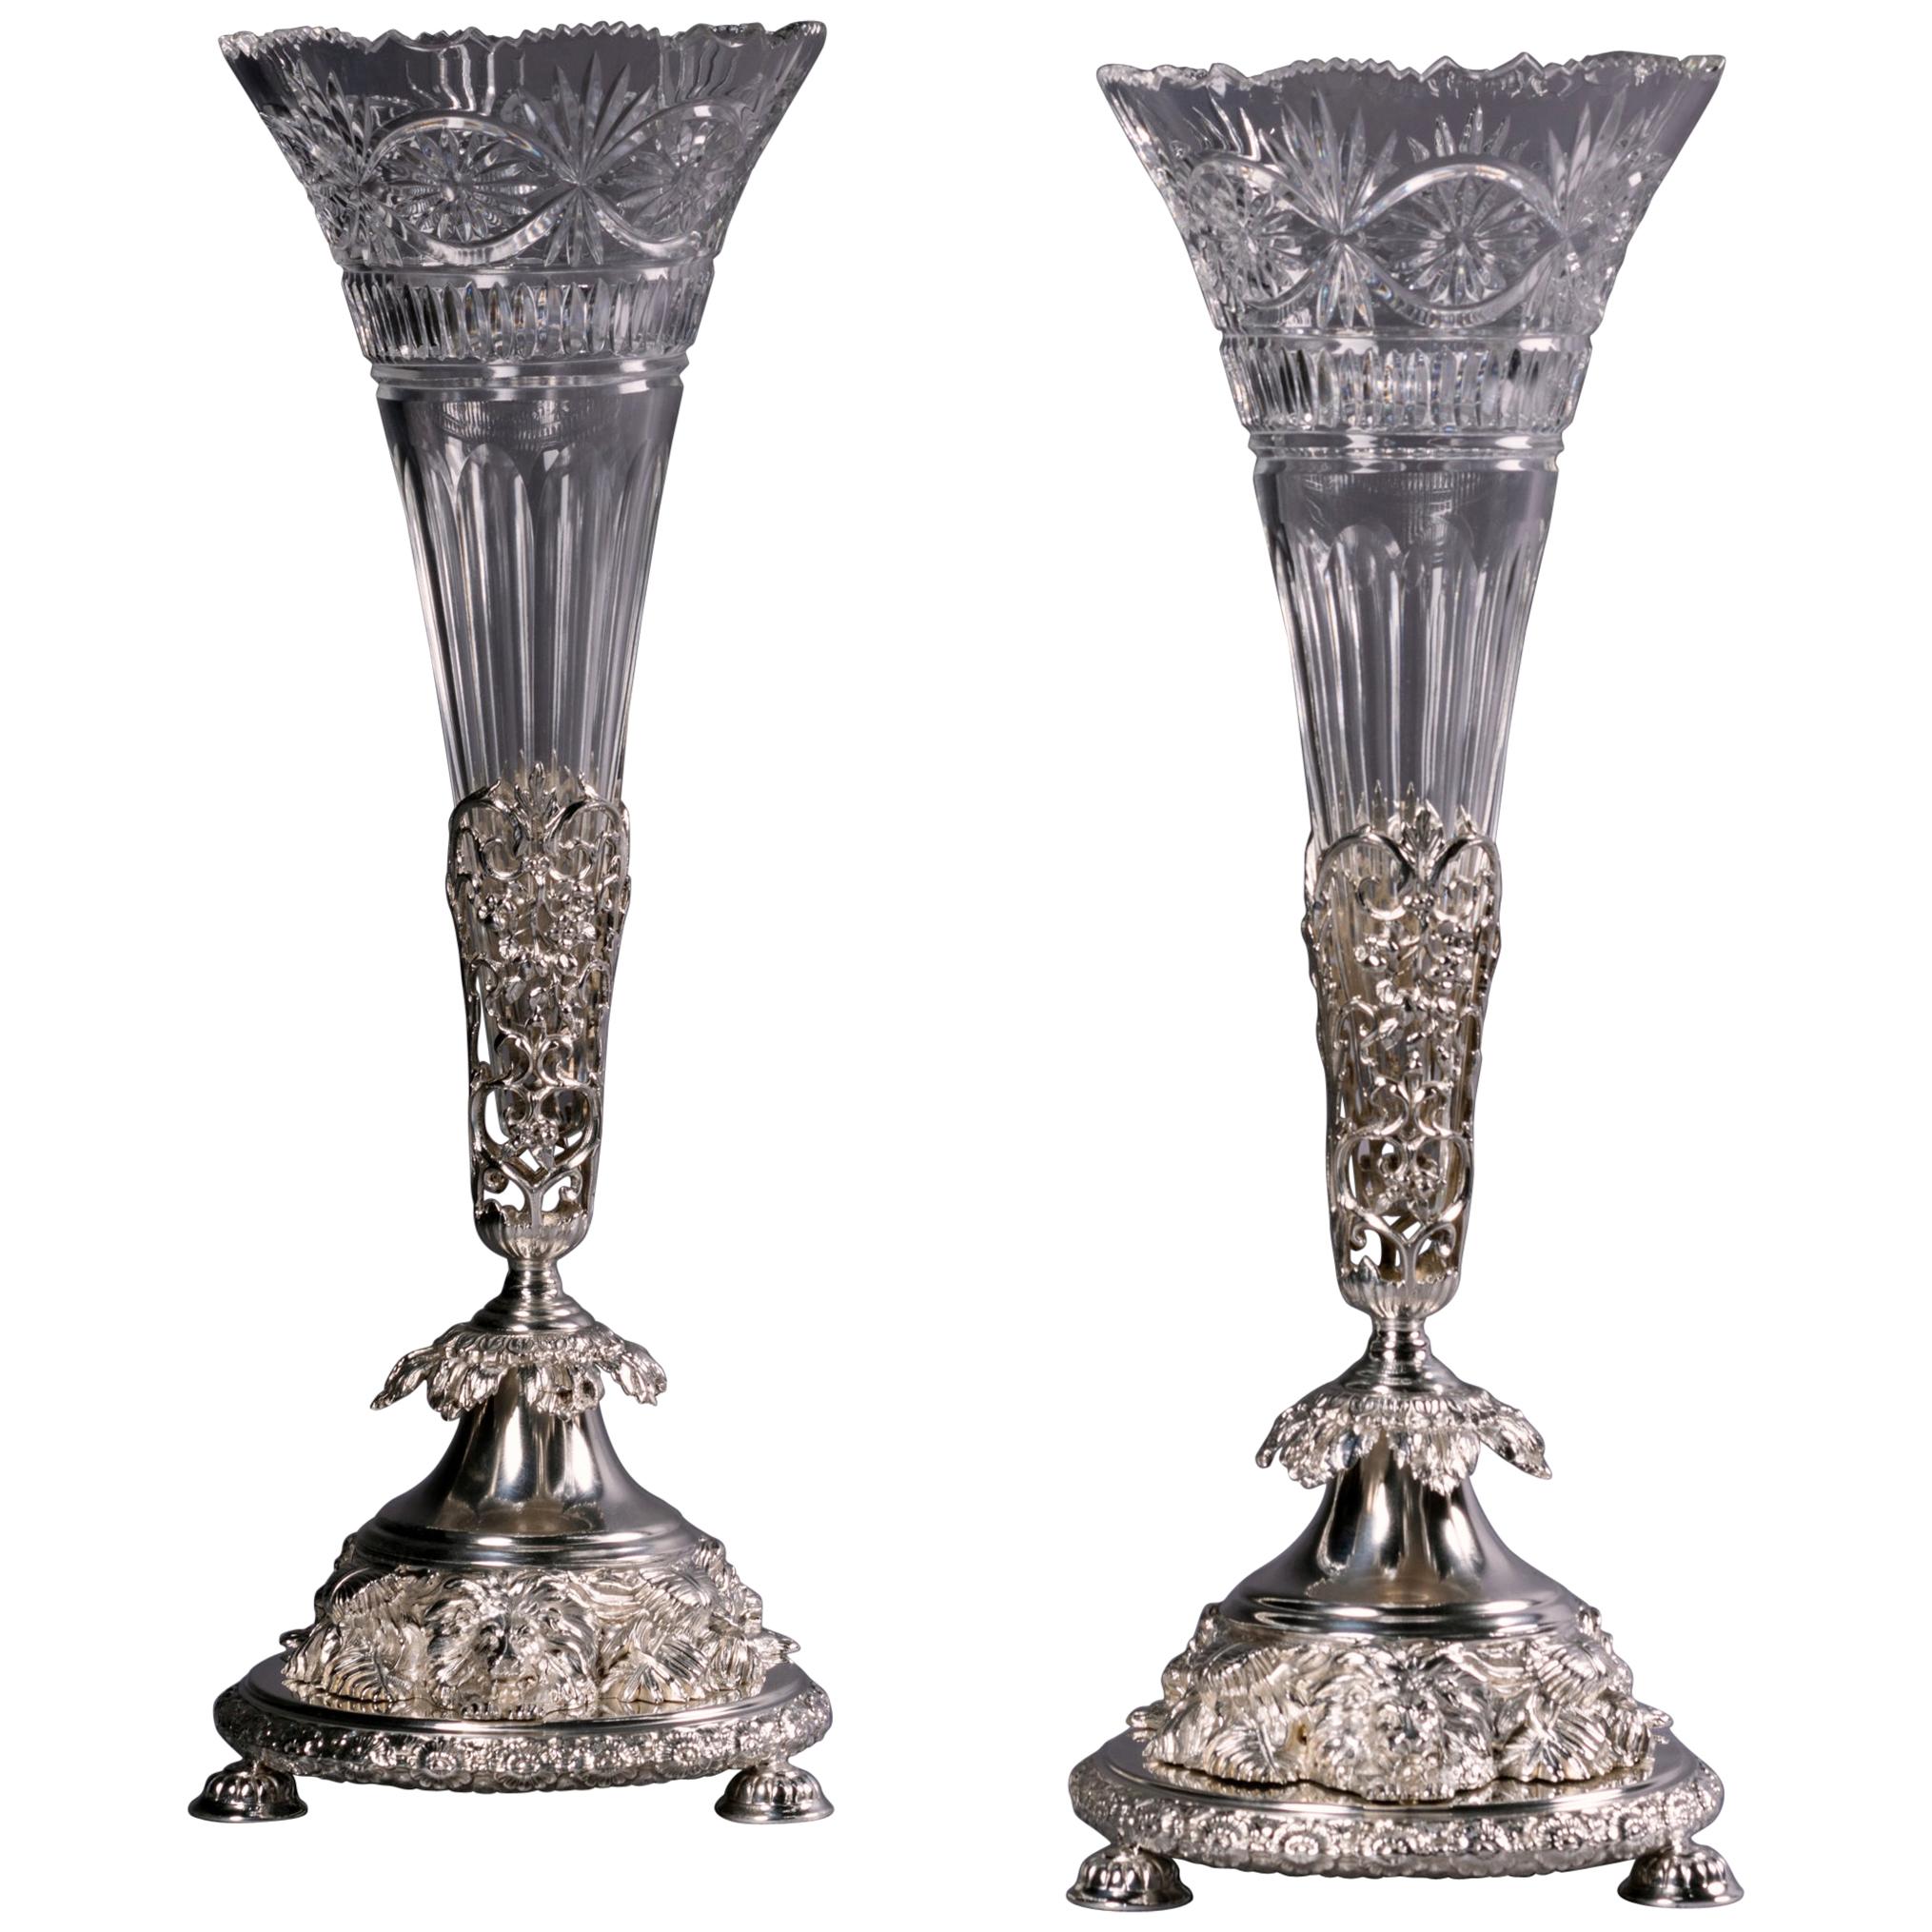 Pair of 19th Century English Silver-Plated and Cut-Glass Vases